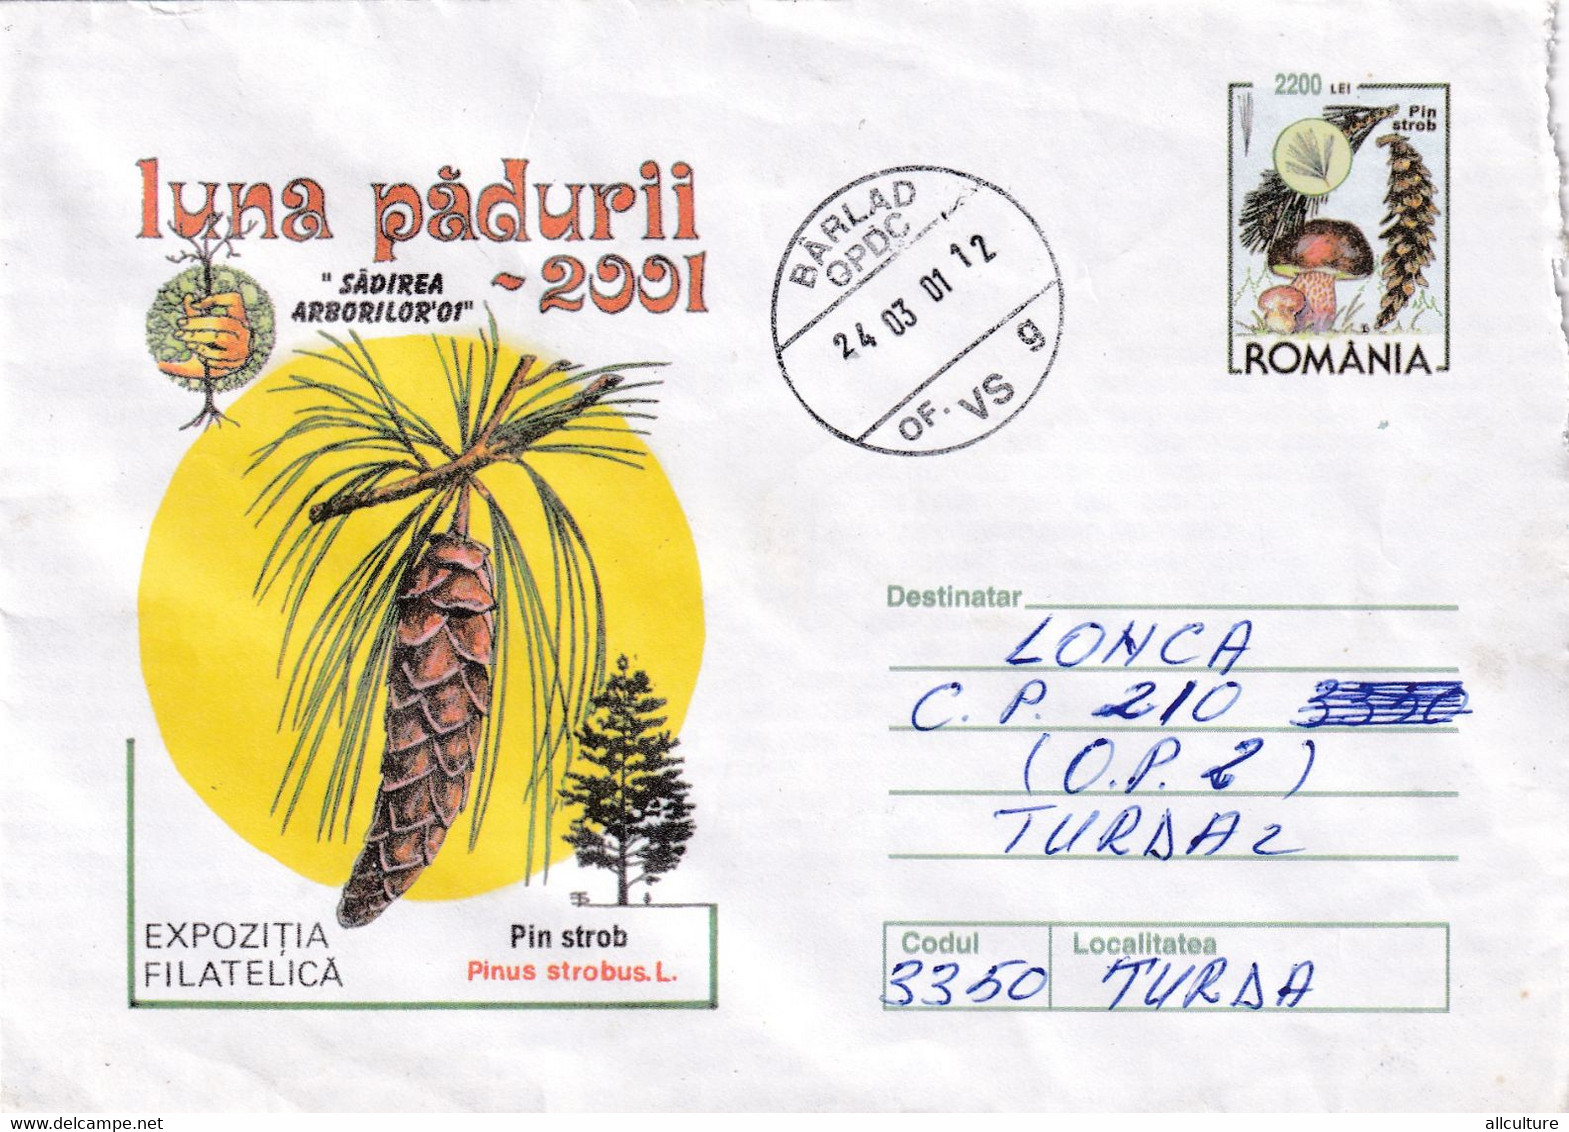 A9465- PHYLATELIC EXHIBITION FOREST MONTH 2001 PINUS STOBUS, ROMANIA 2001 ROMANIAN POSTAGE STAMP COVER STATIONERY - Exposiciones Filatélicas